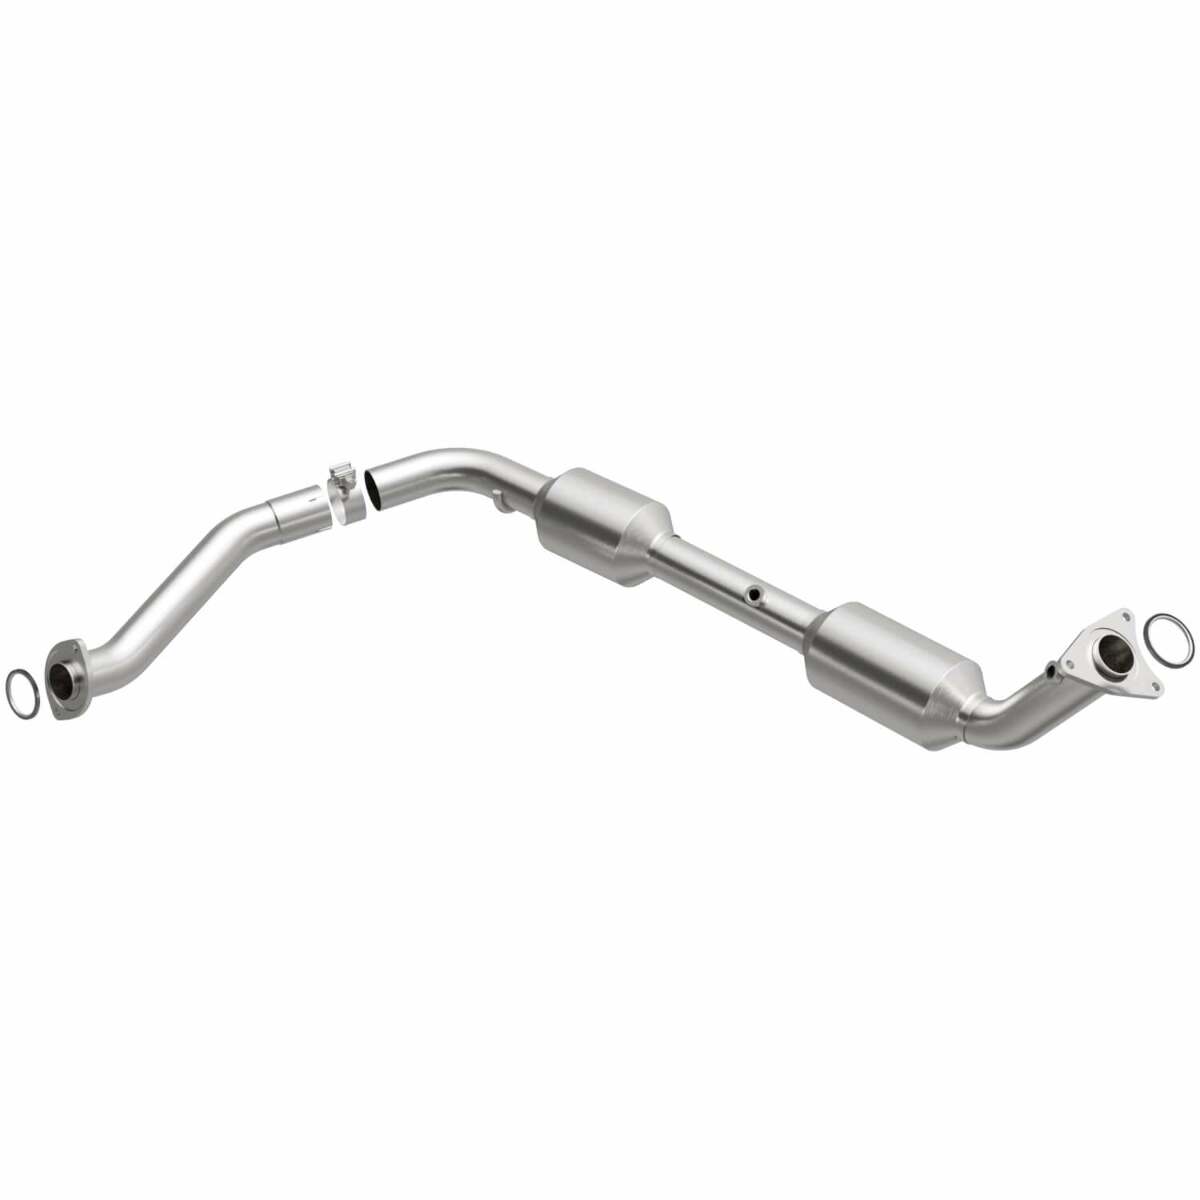 2007-2010 Toyota Tundra 5.7L Direct-Fit Catalytic Converter 5582629 Magnaflow